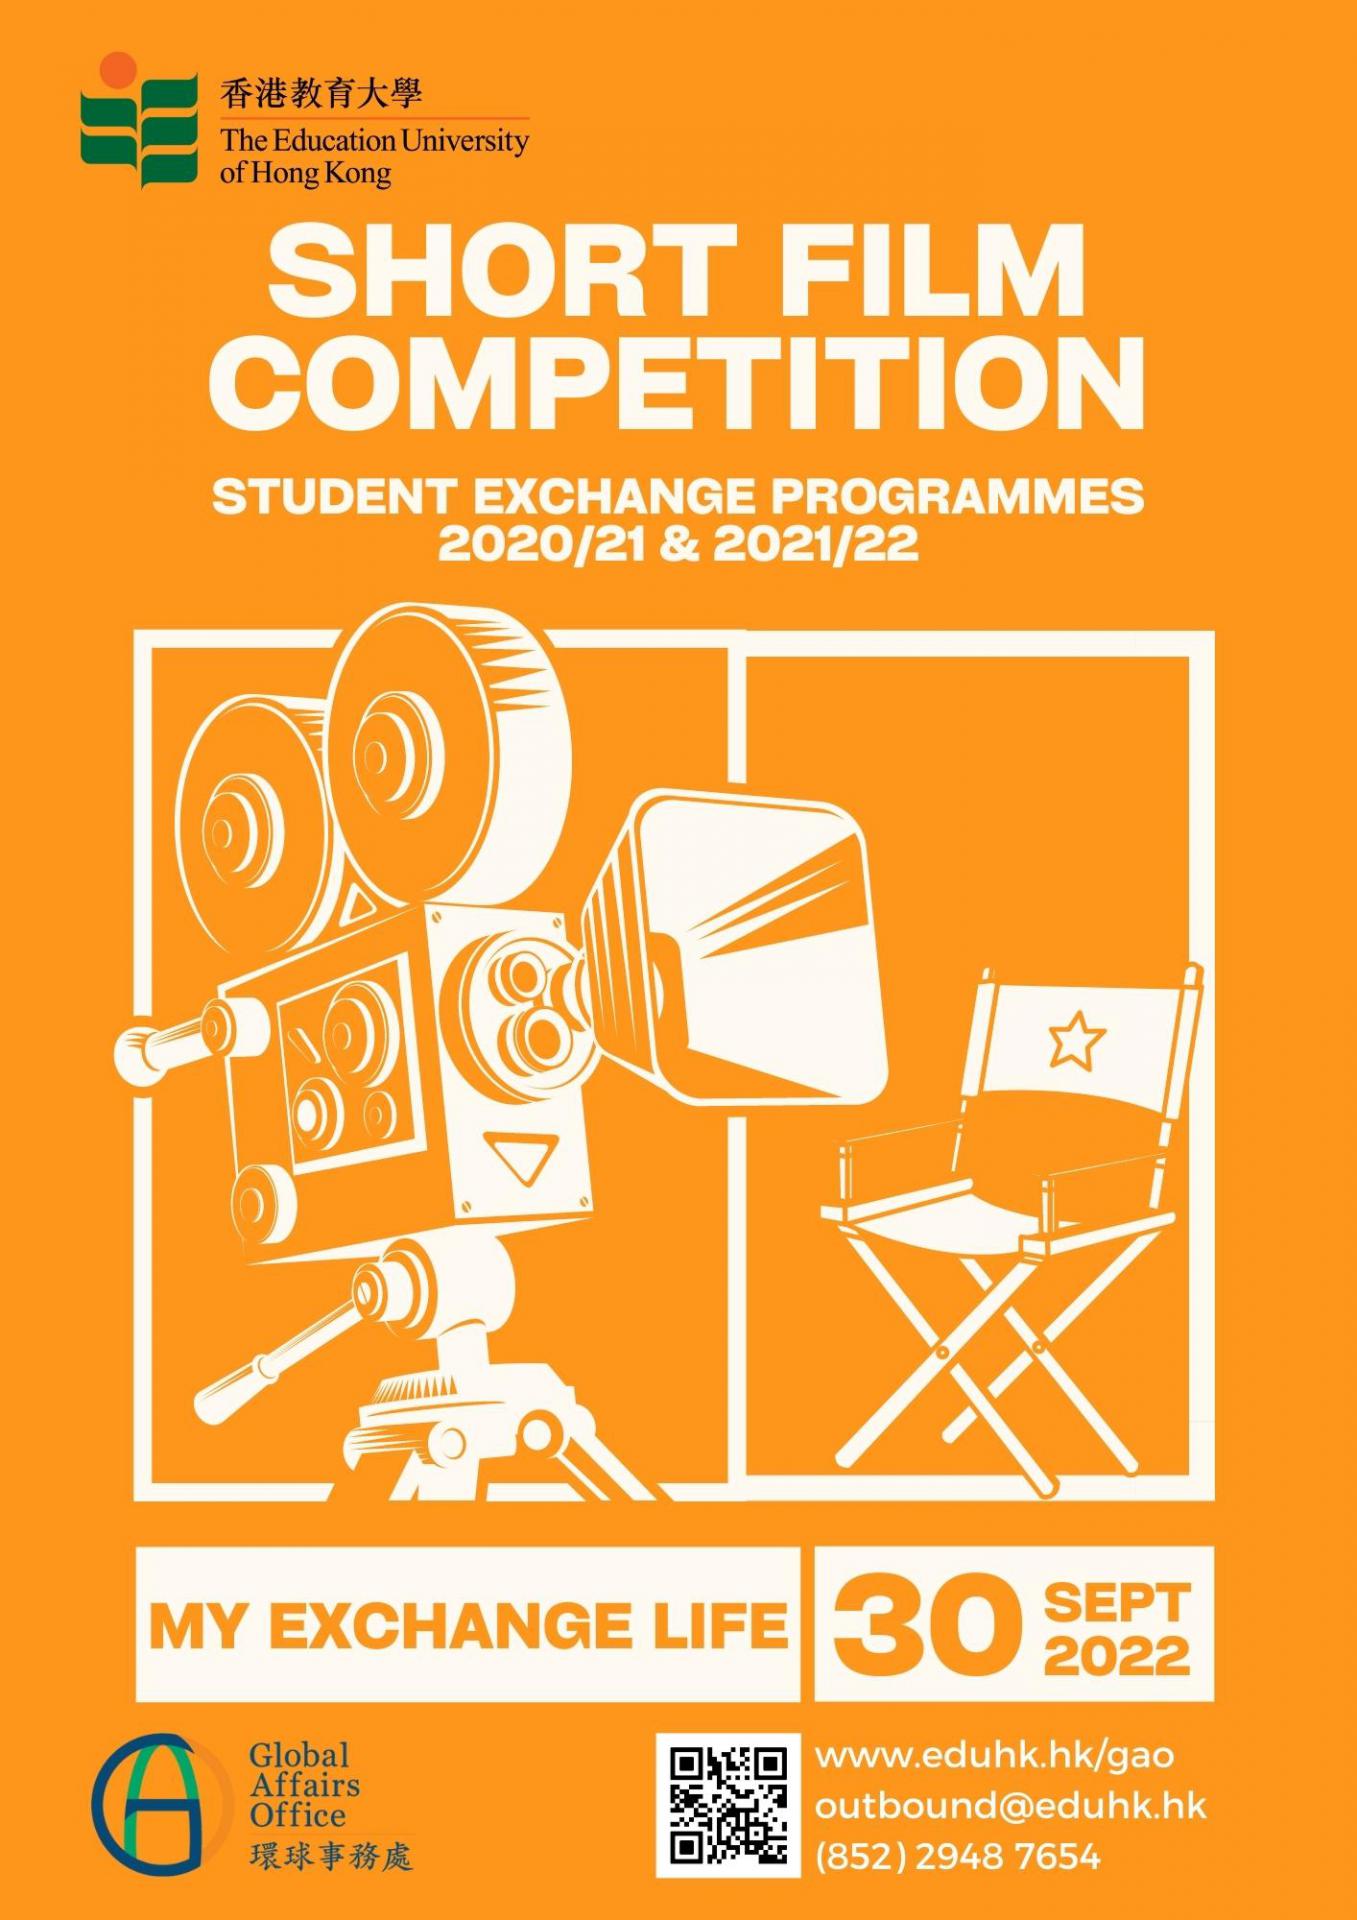 Short Film Competition “Student Exchange Programmes 2020/21 and 2021/22 - Sharing Exchange Experience”